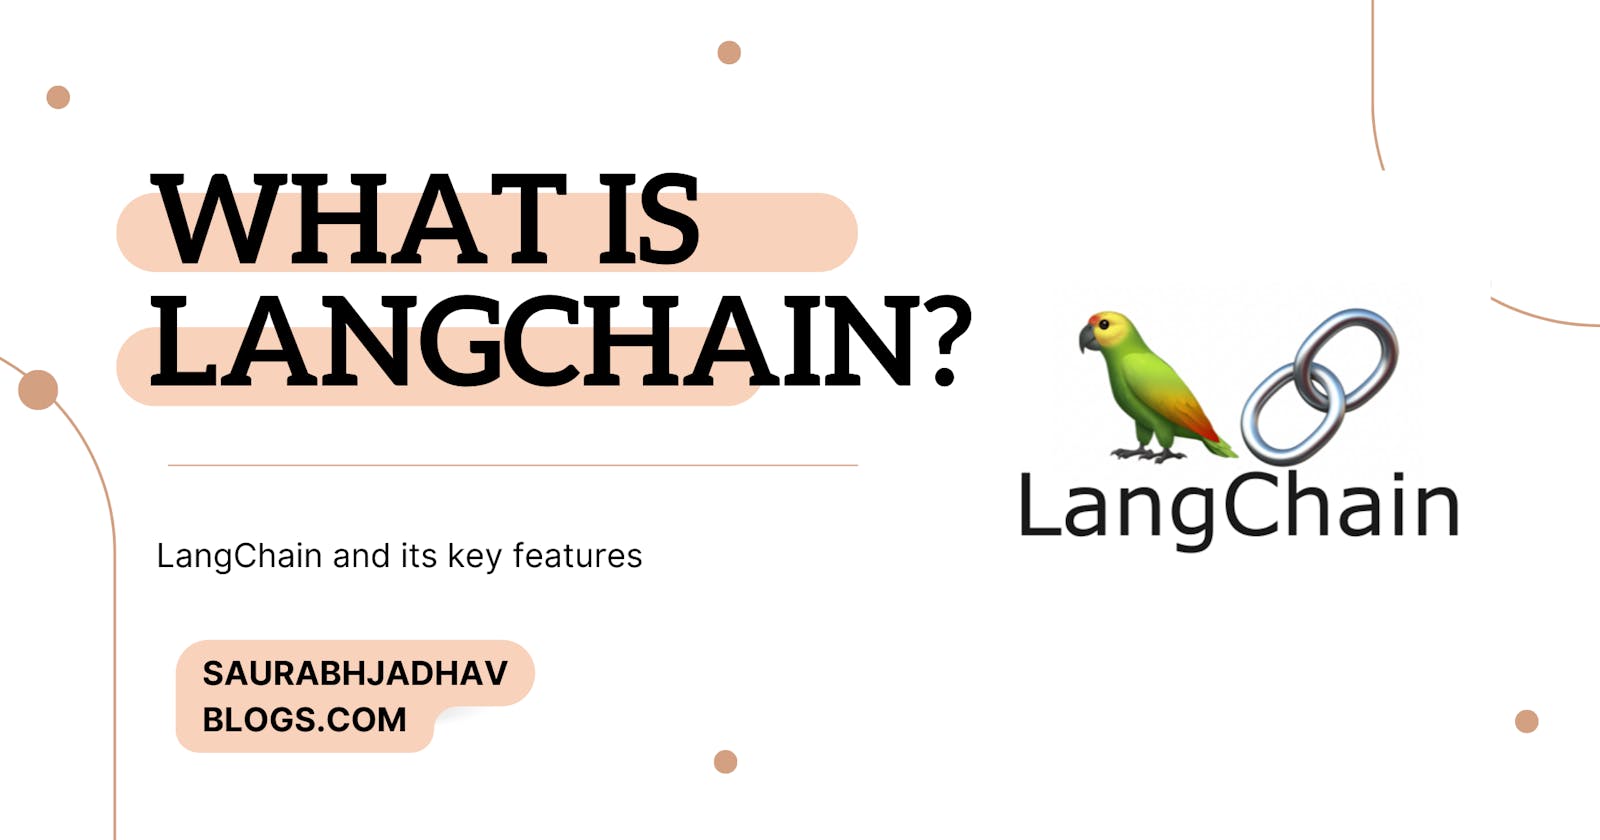 What is LangChain? A brief introduction to LangChain and its key features.